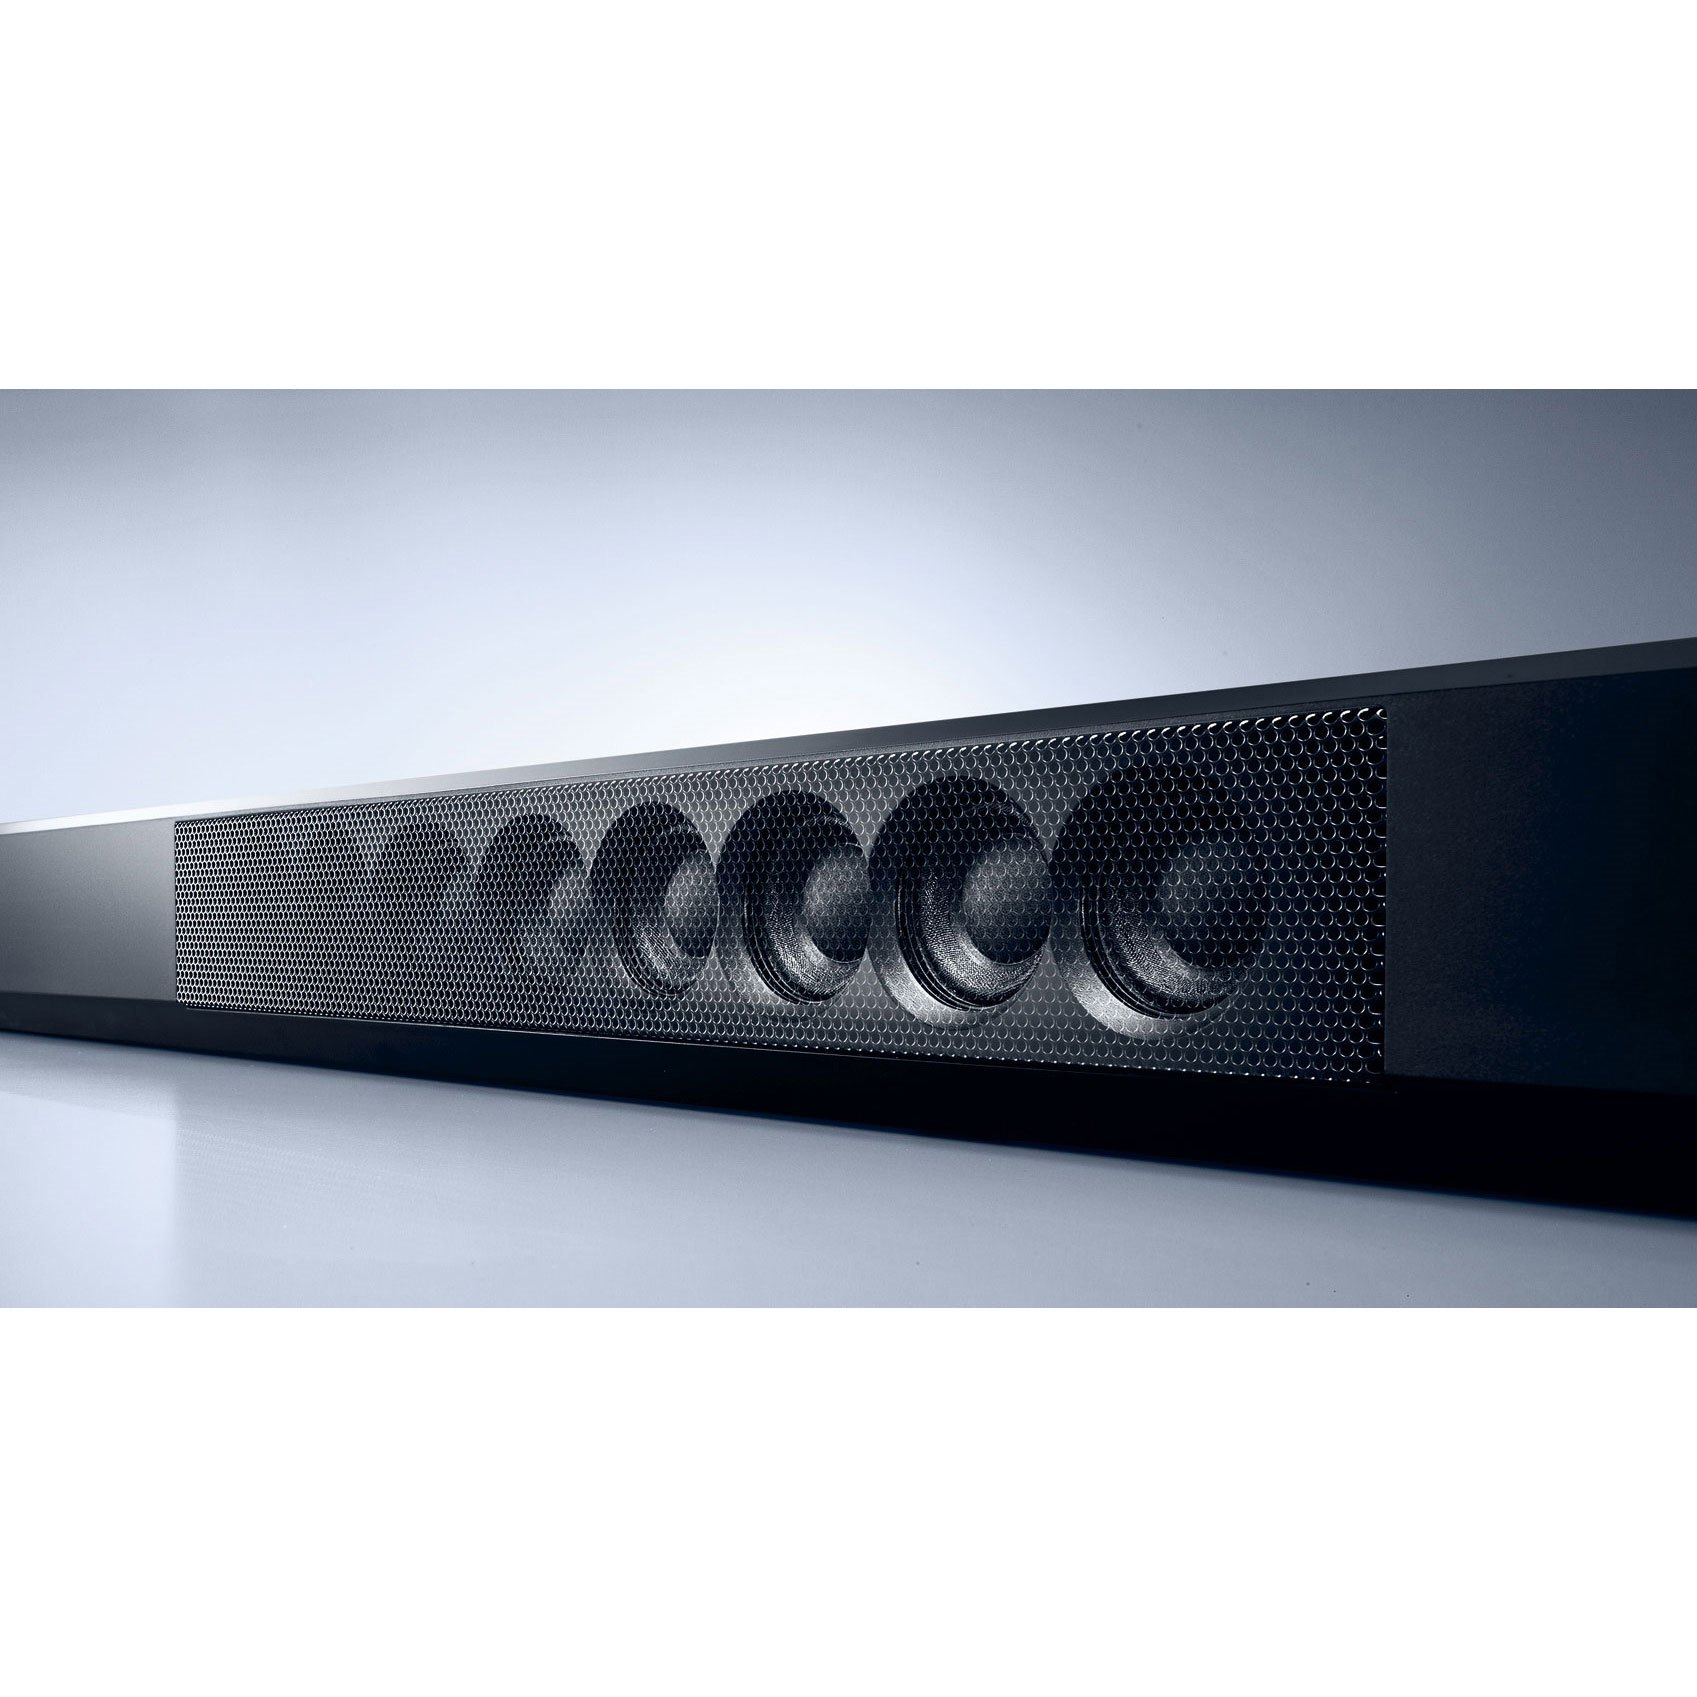 YSP-1600 - Overview - Sound Bars - Audio & Visual - Products 